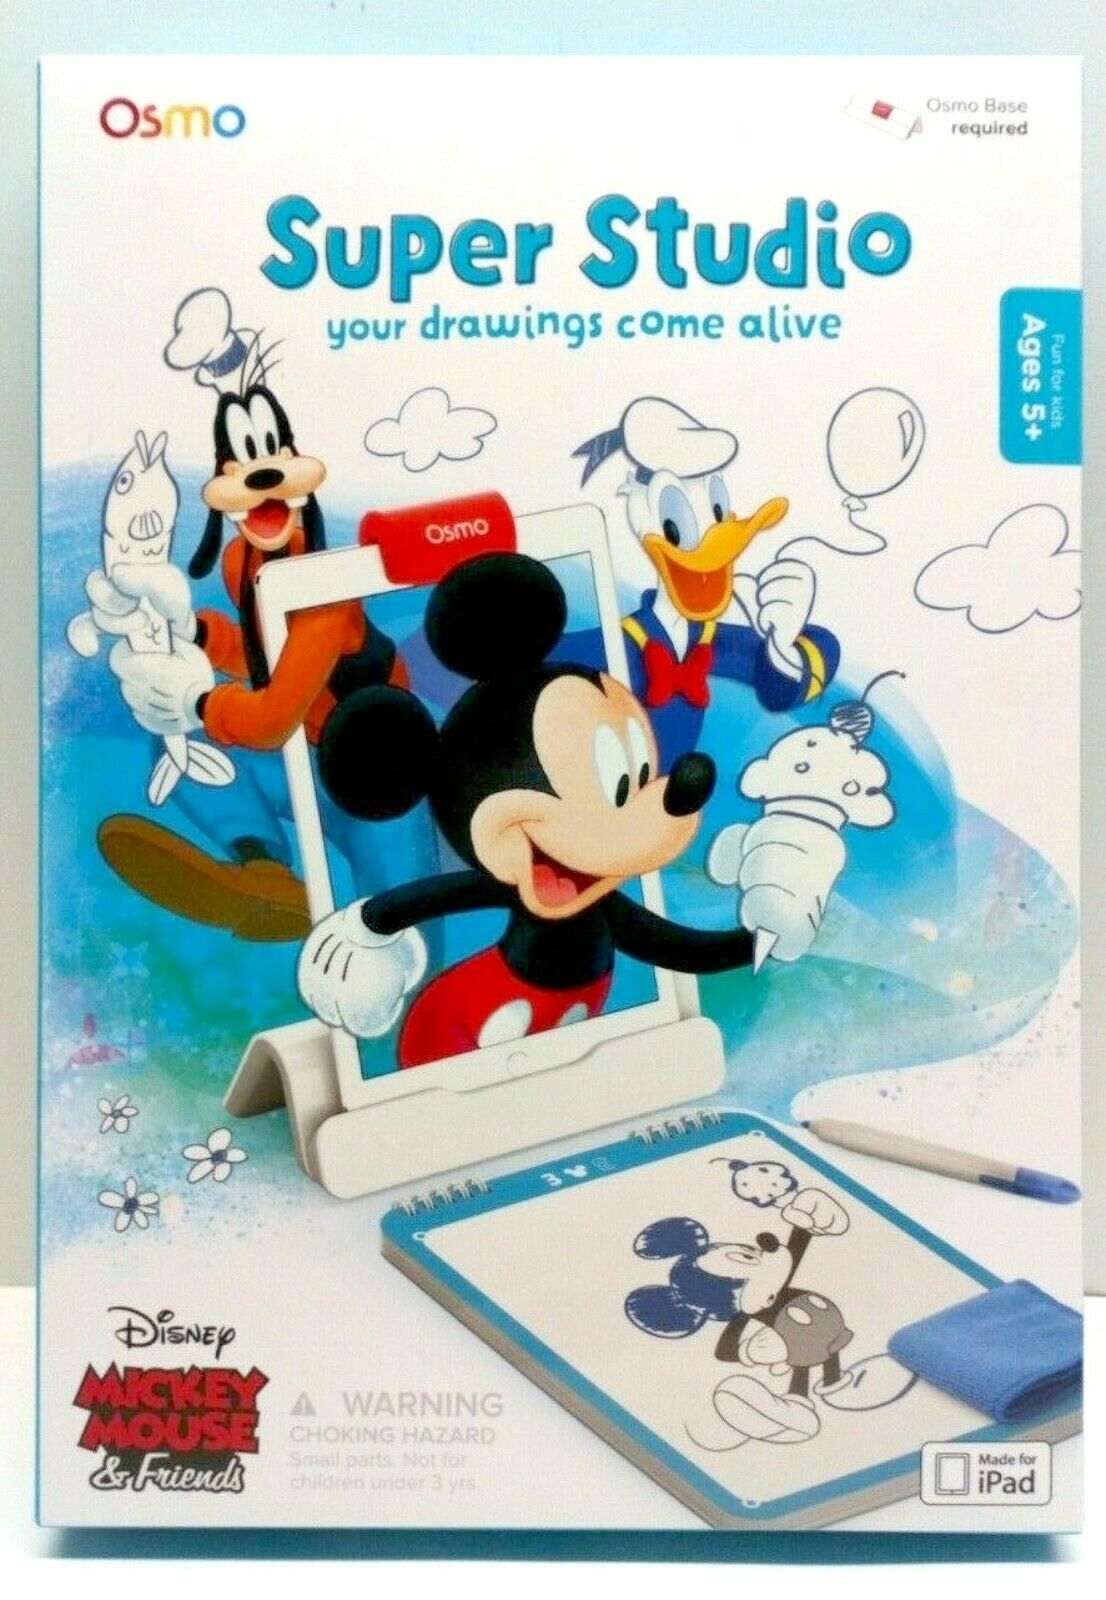 New Osmo Super Studio Mickey Mouse & Friends Ipad Game - Base Required - Drawing